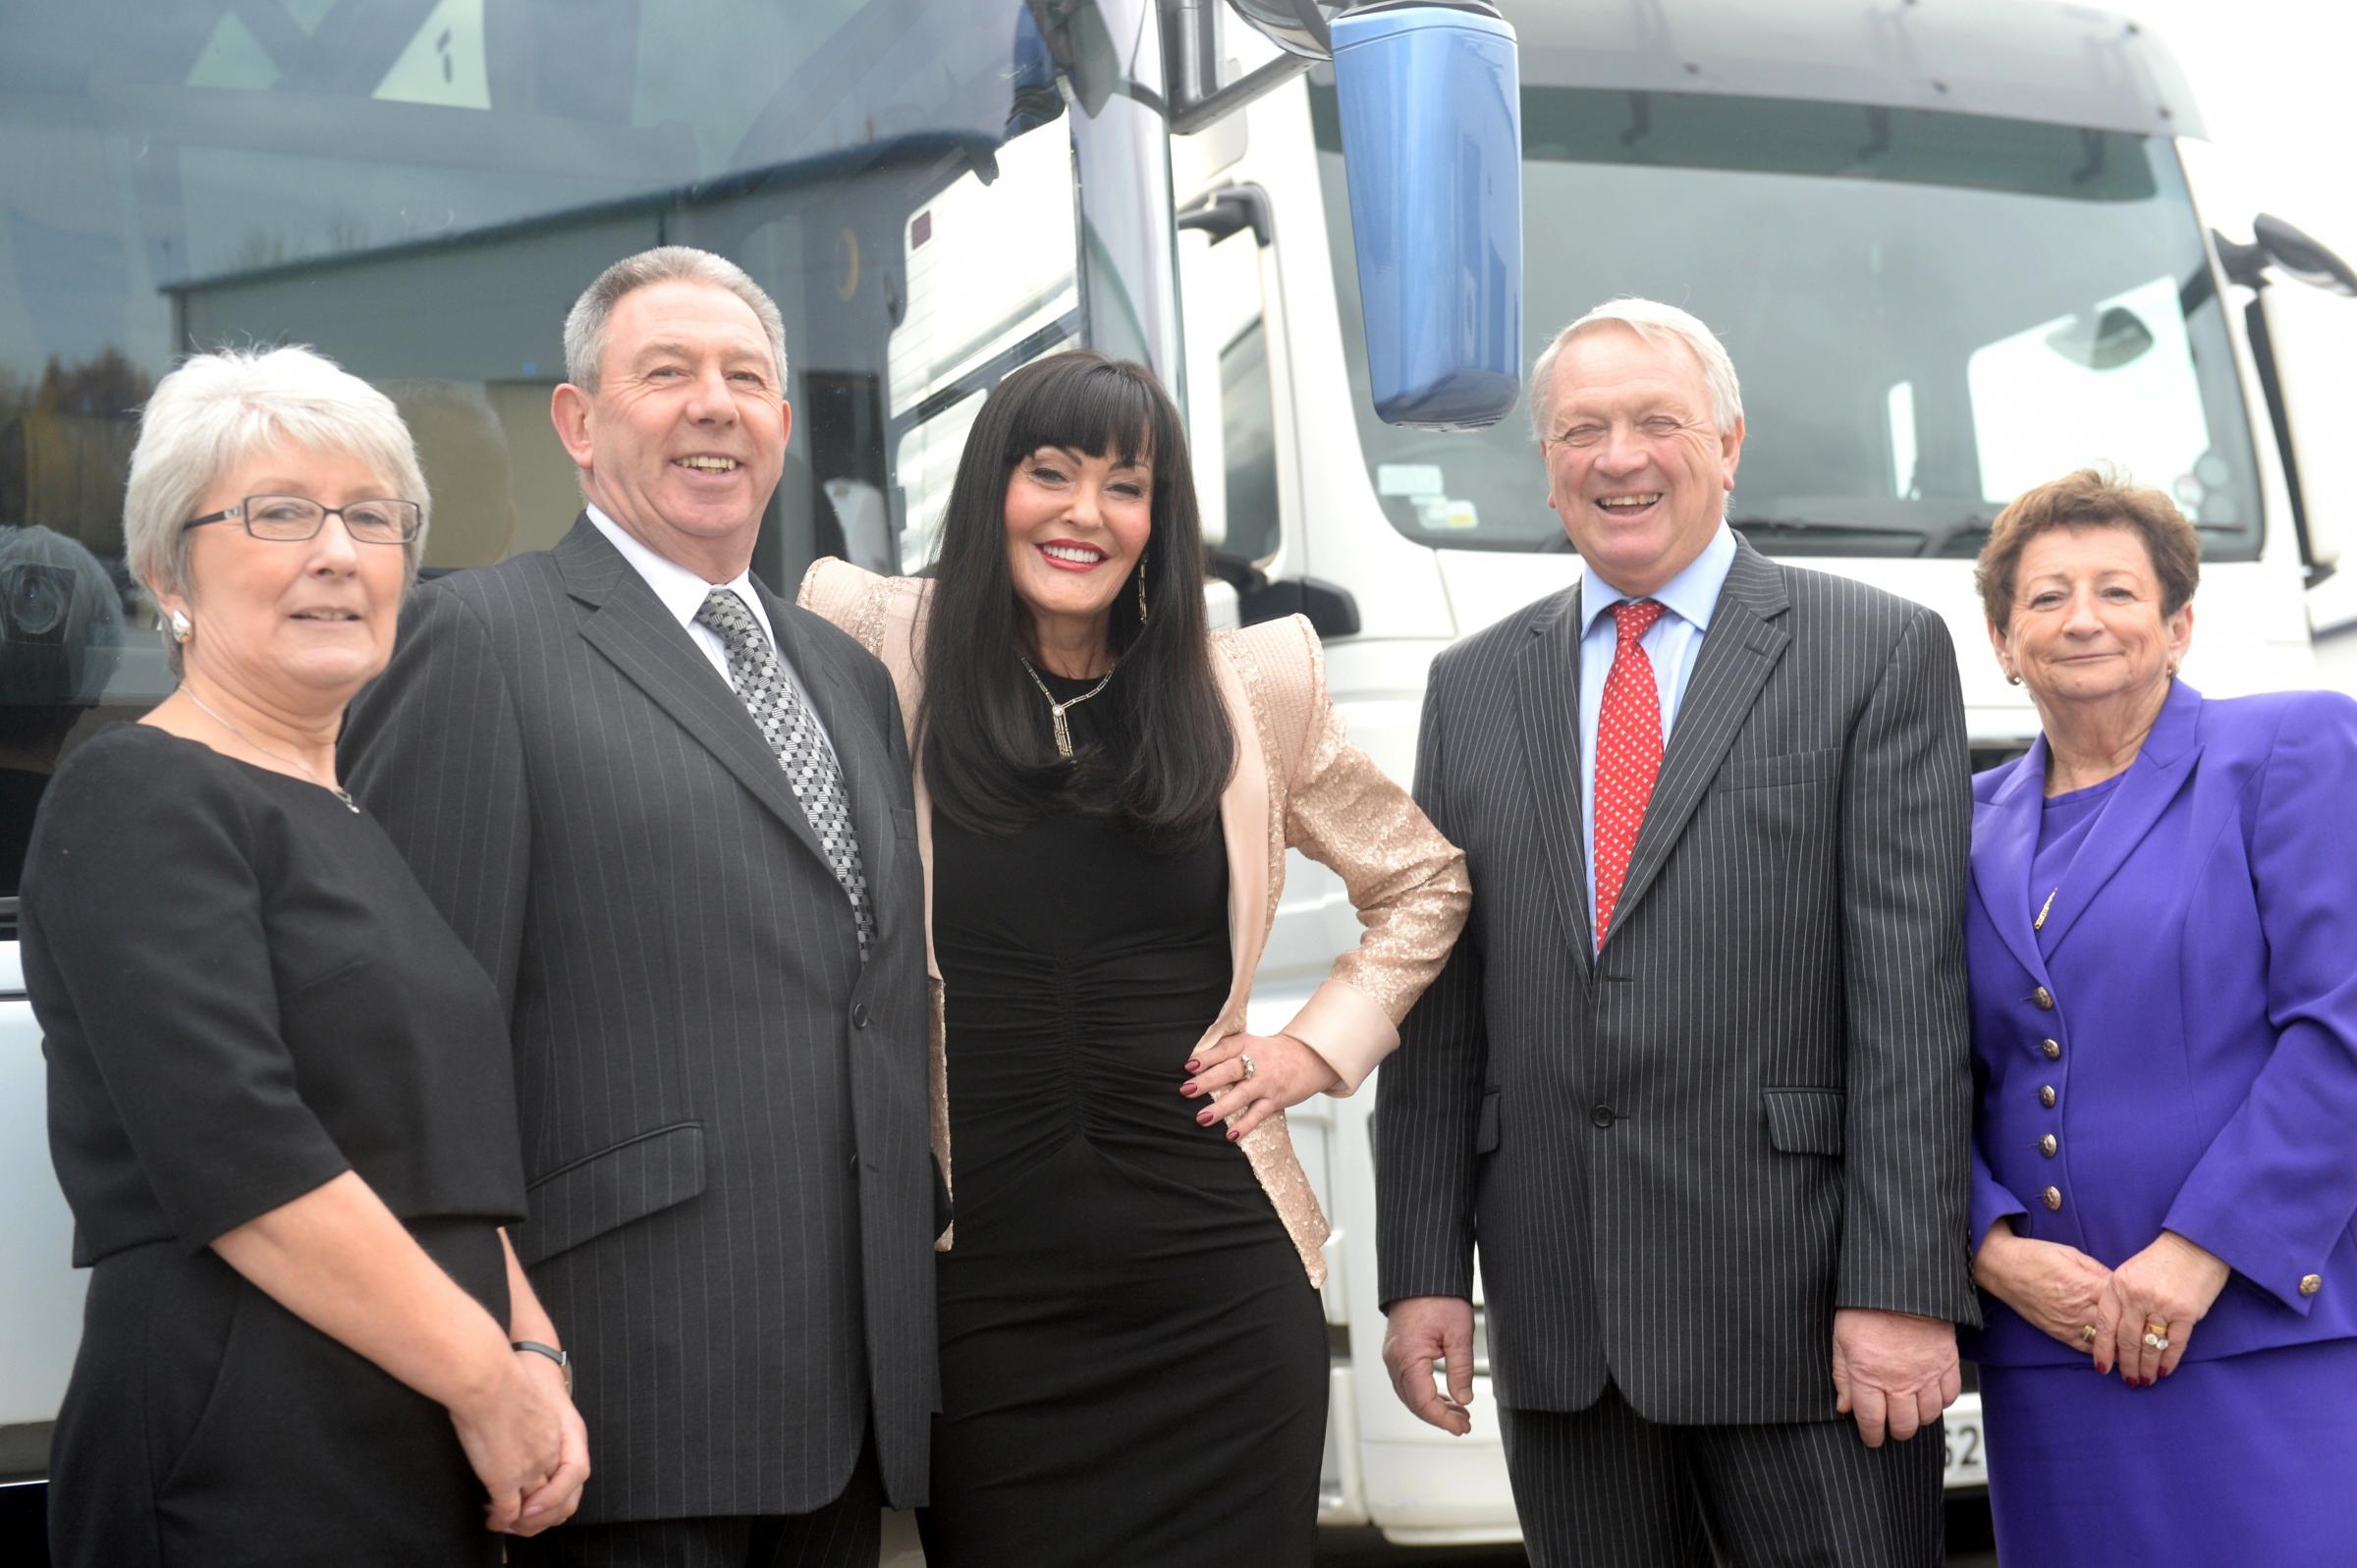 Hilary Devey at Commercial motors. (left to right) Mary Manchip, Robert Manchip, Hilary Devey, Roger Sheddick and Gill Sheddick.